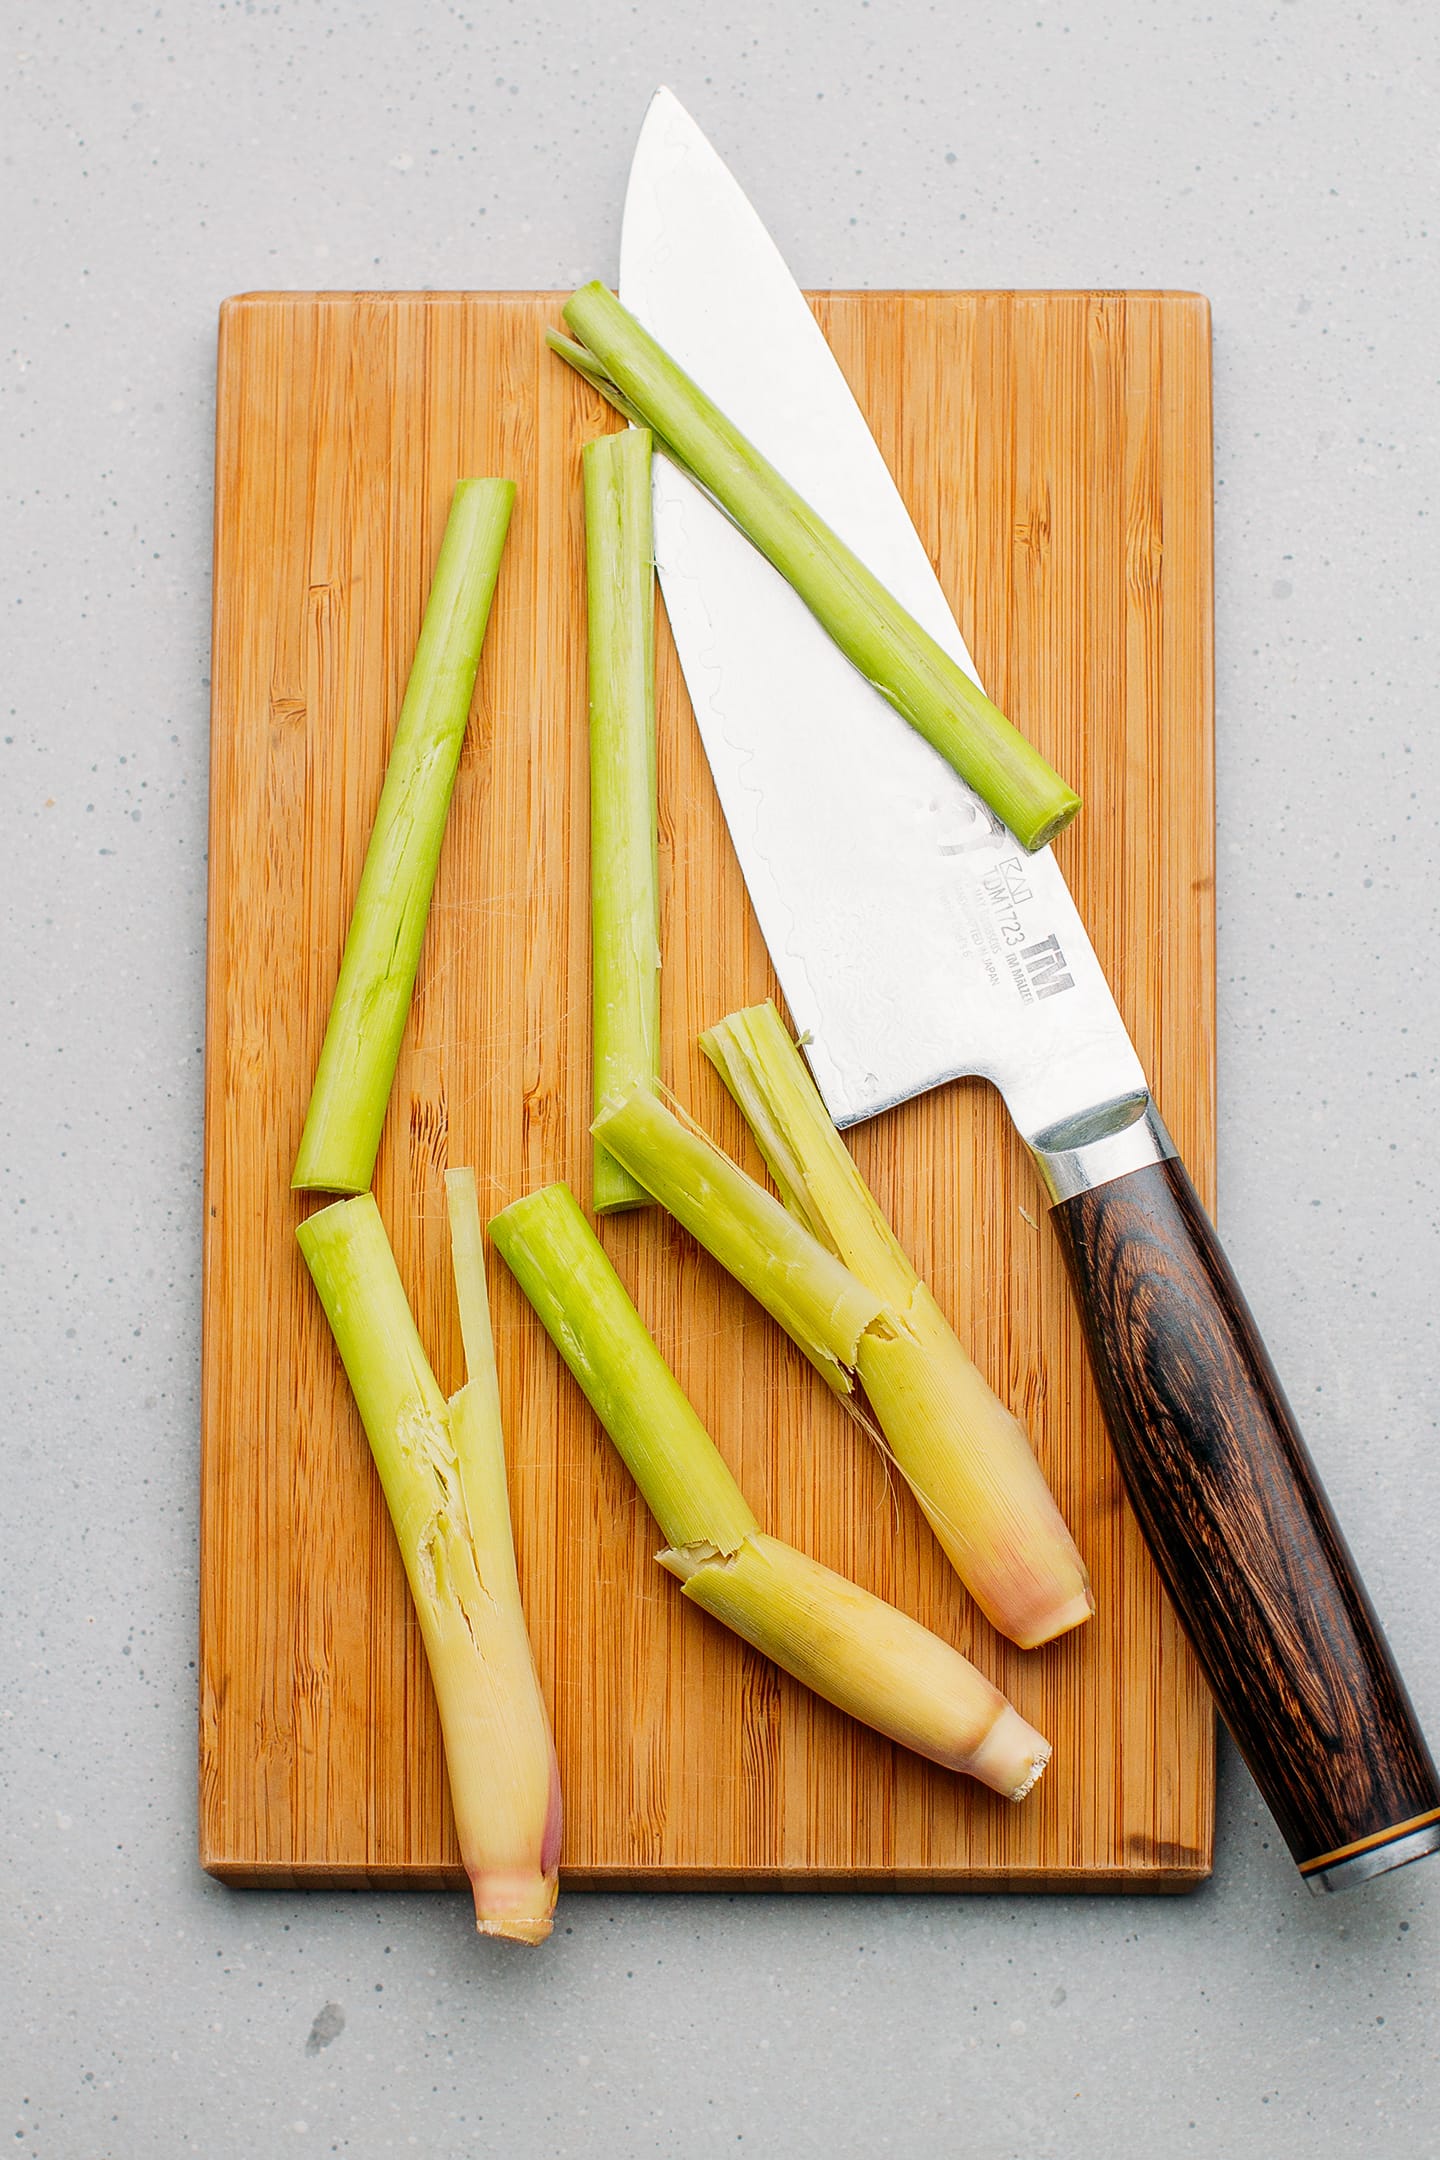 Sliced and crushed lemongrass stalks on a cutting board.